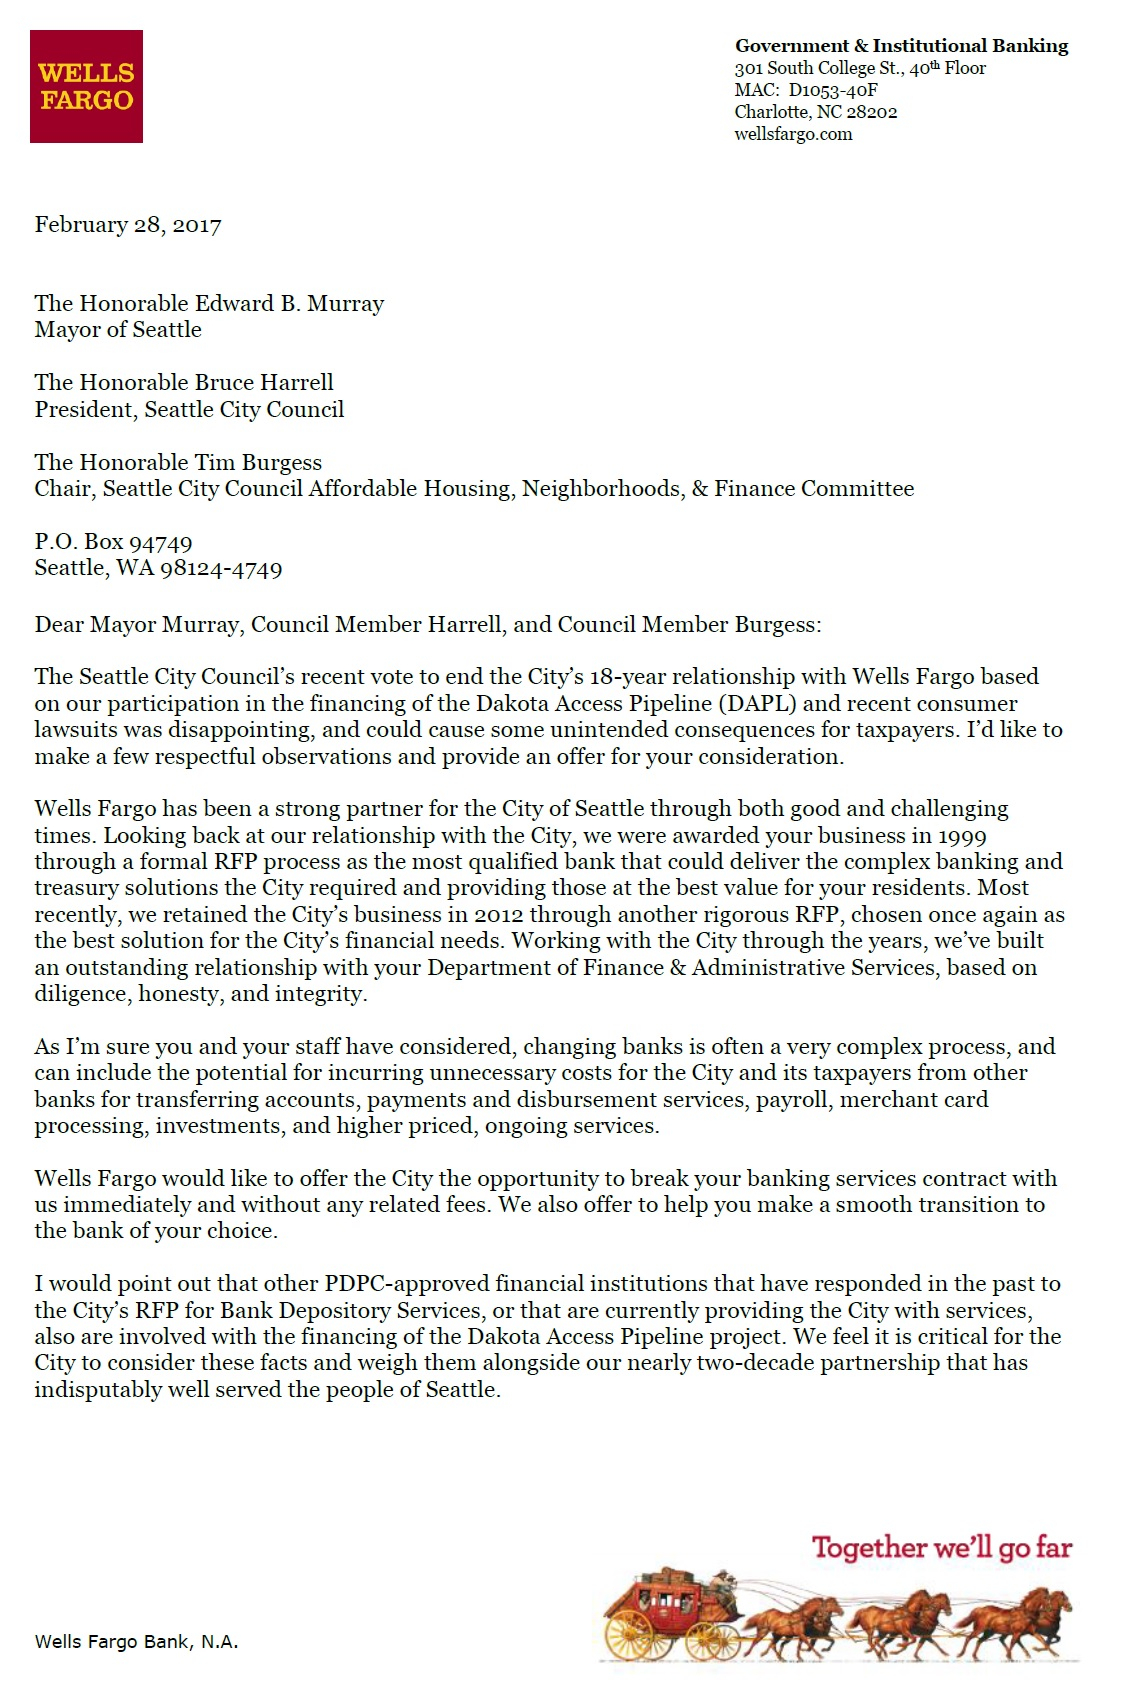 Wells Fargo Sends New Letter To City Offers To End Contract intended for proportions 1141 X 1691